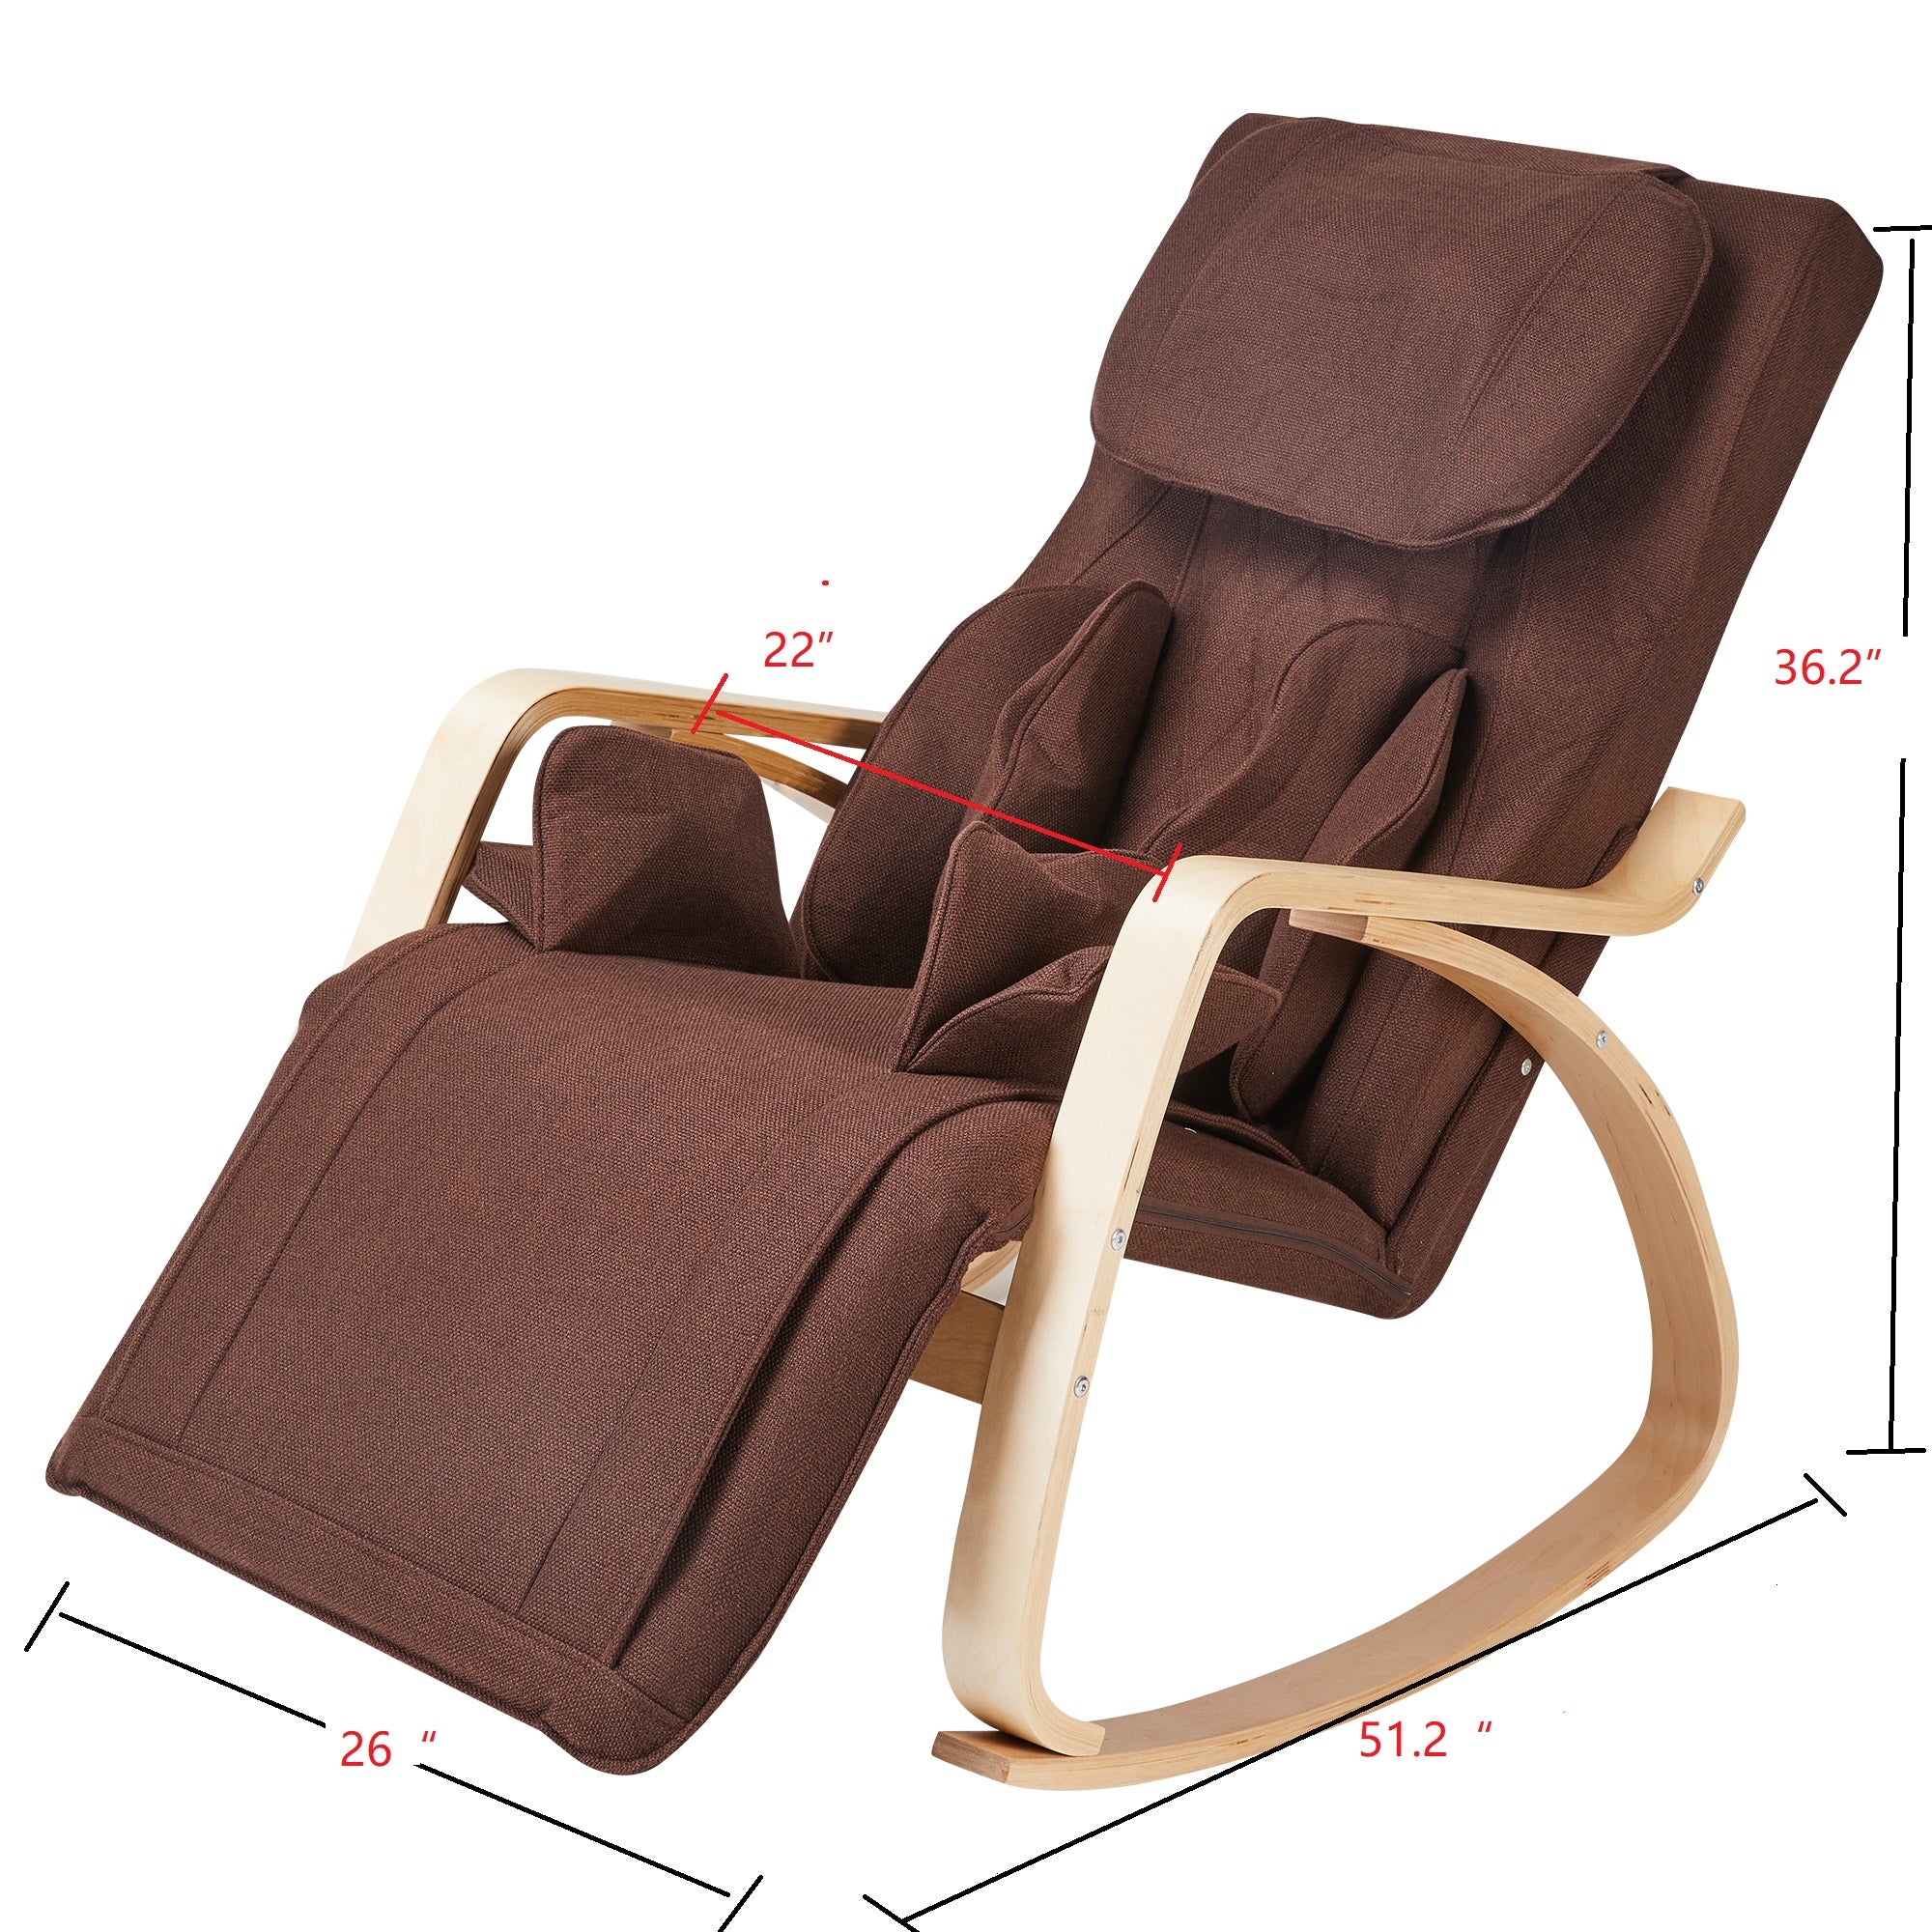 ZNTS Full massage function-Air pressure-Comfortable Relax Rocking Chair, Lounge Chair Relax Chair with W31135544